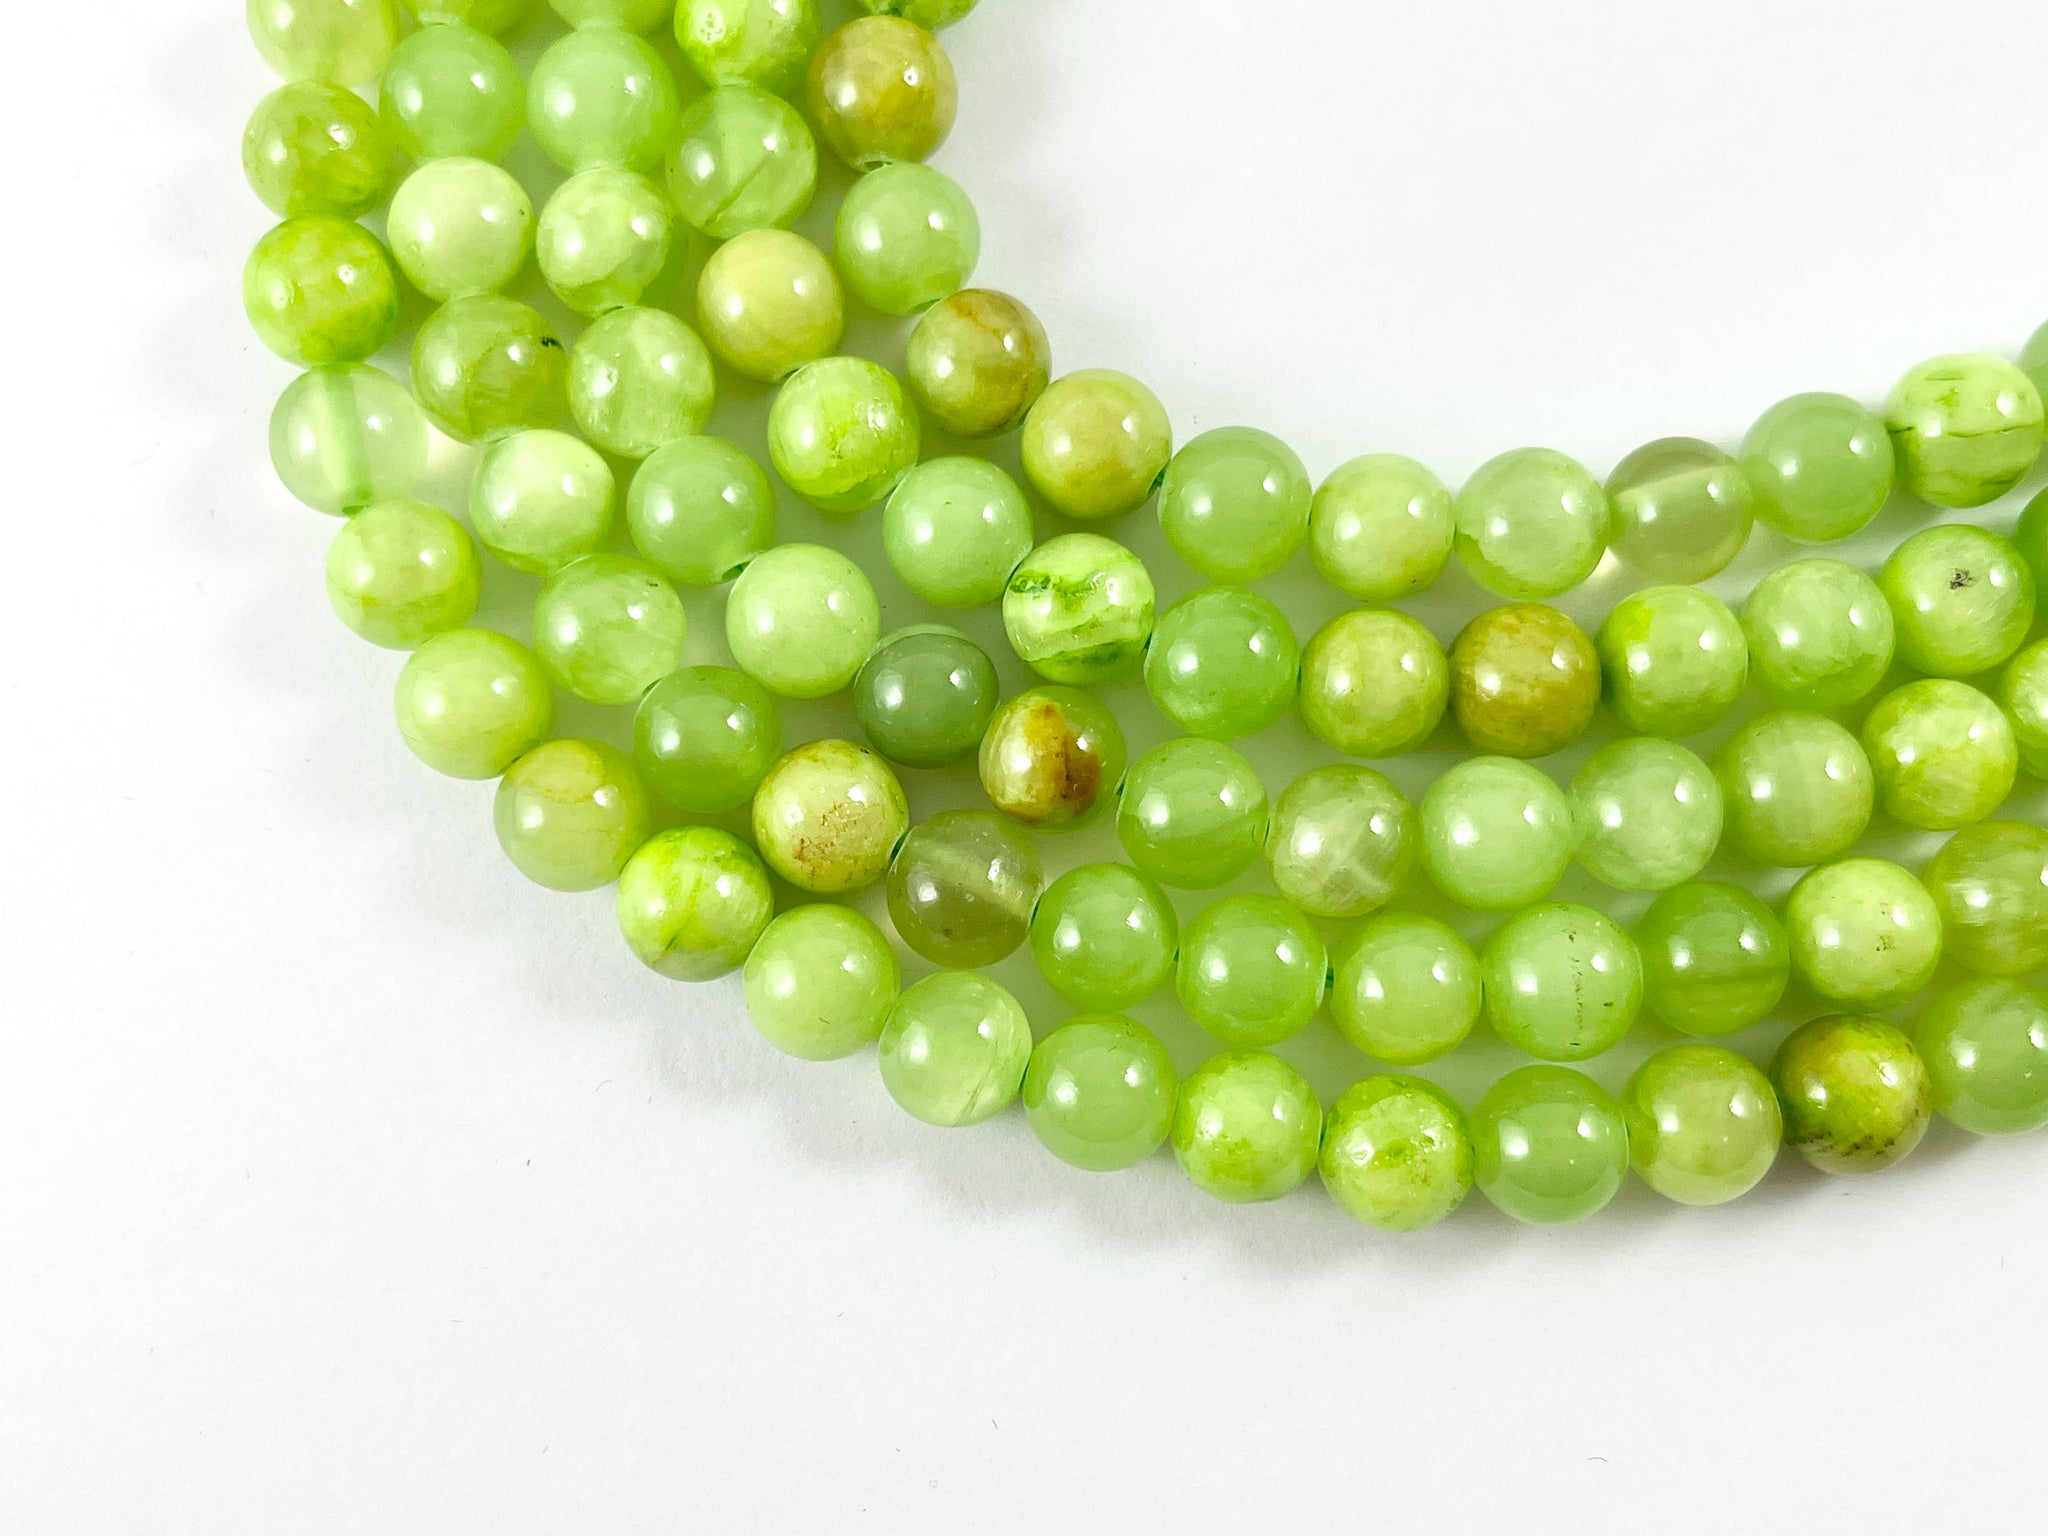 10mm Round Natural Light Green Jade Beads for Jewelry Making DIY Strands 15